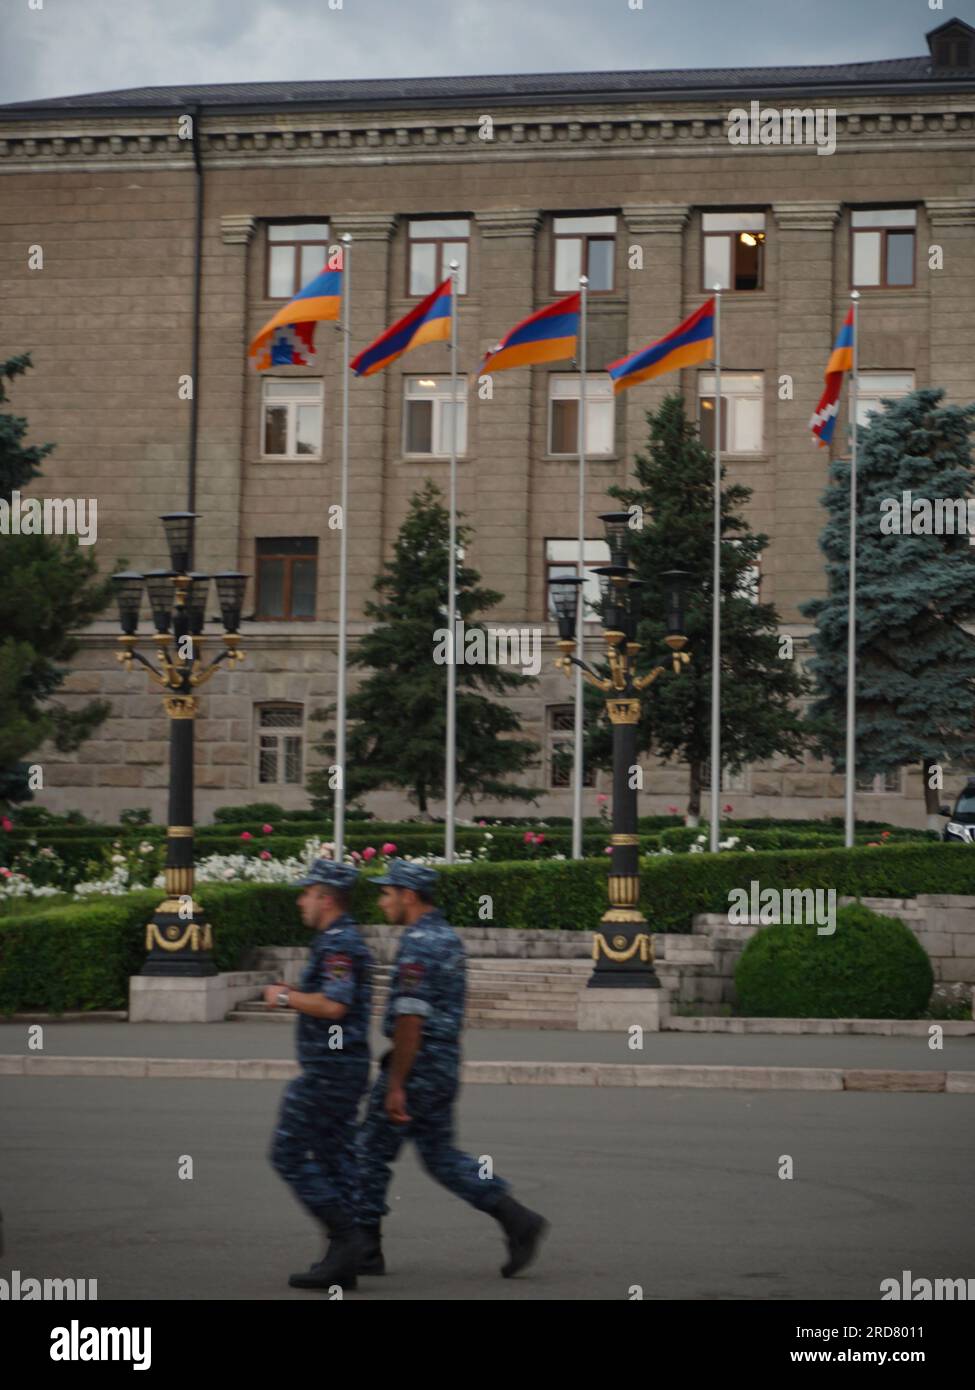 Two soldiers seen walking past a row of Karabakh flags lining outside the Presidential Building in Stepanakert, Nagorno-Karabakh. The unrecognised yet de facto independent country in South Caucasus, Nagorno-Karabakh (also known as Artsakh) has been in the longest-running territorial dispute between Azerbaijan and Armenia in post-Soviet Eurasia since the collapse of Soviet Union. It is mainly populated by ethnic Armenians. Stock Photo